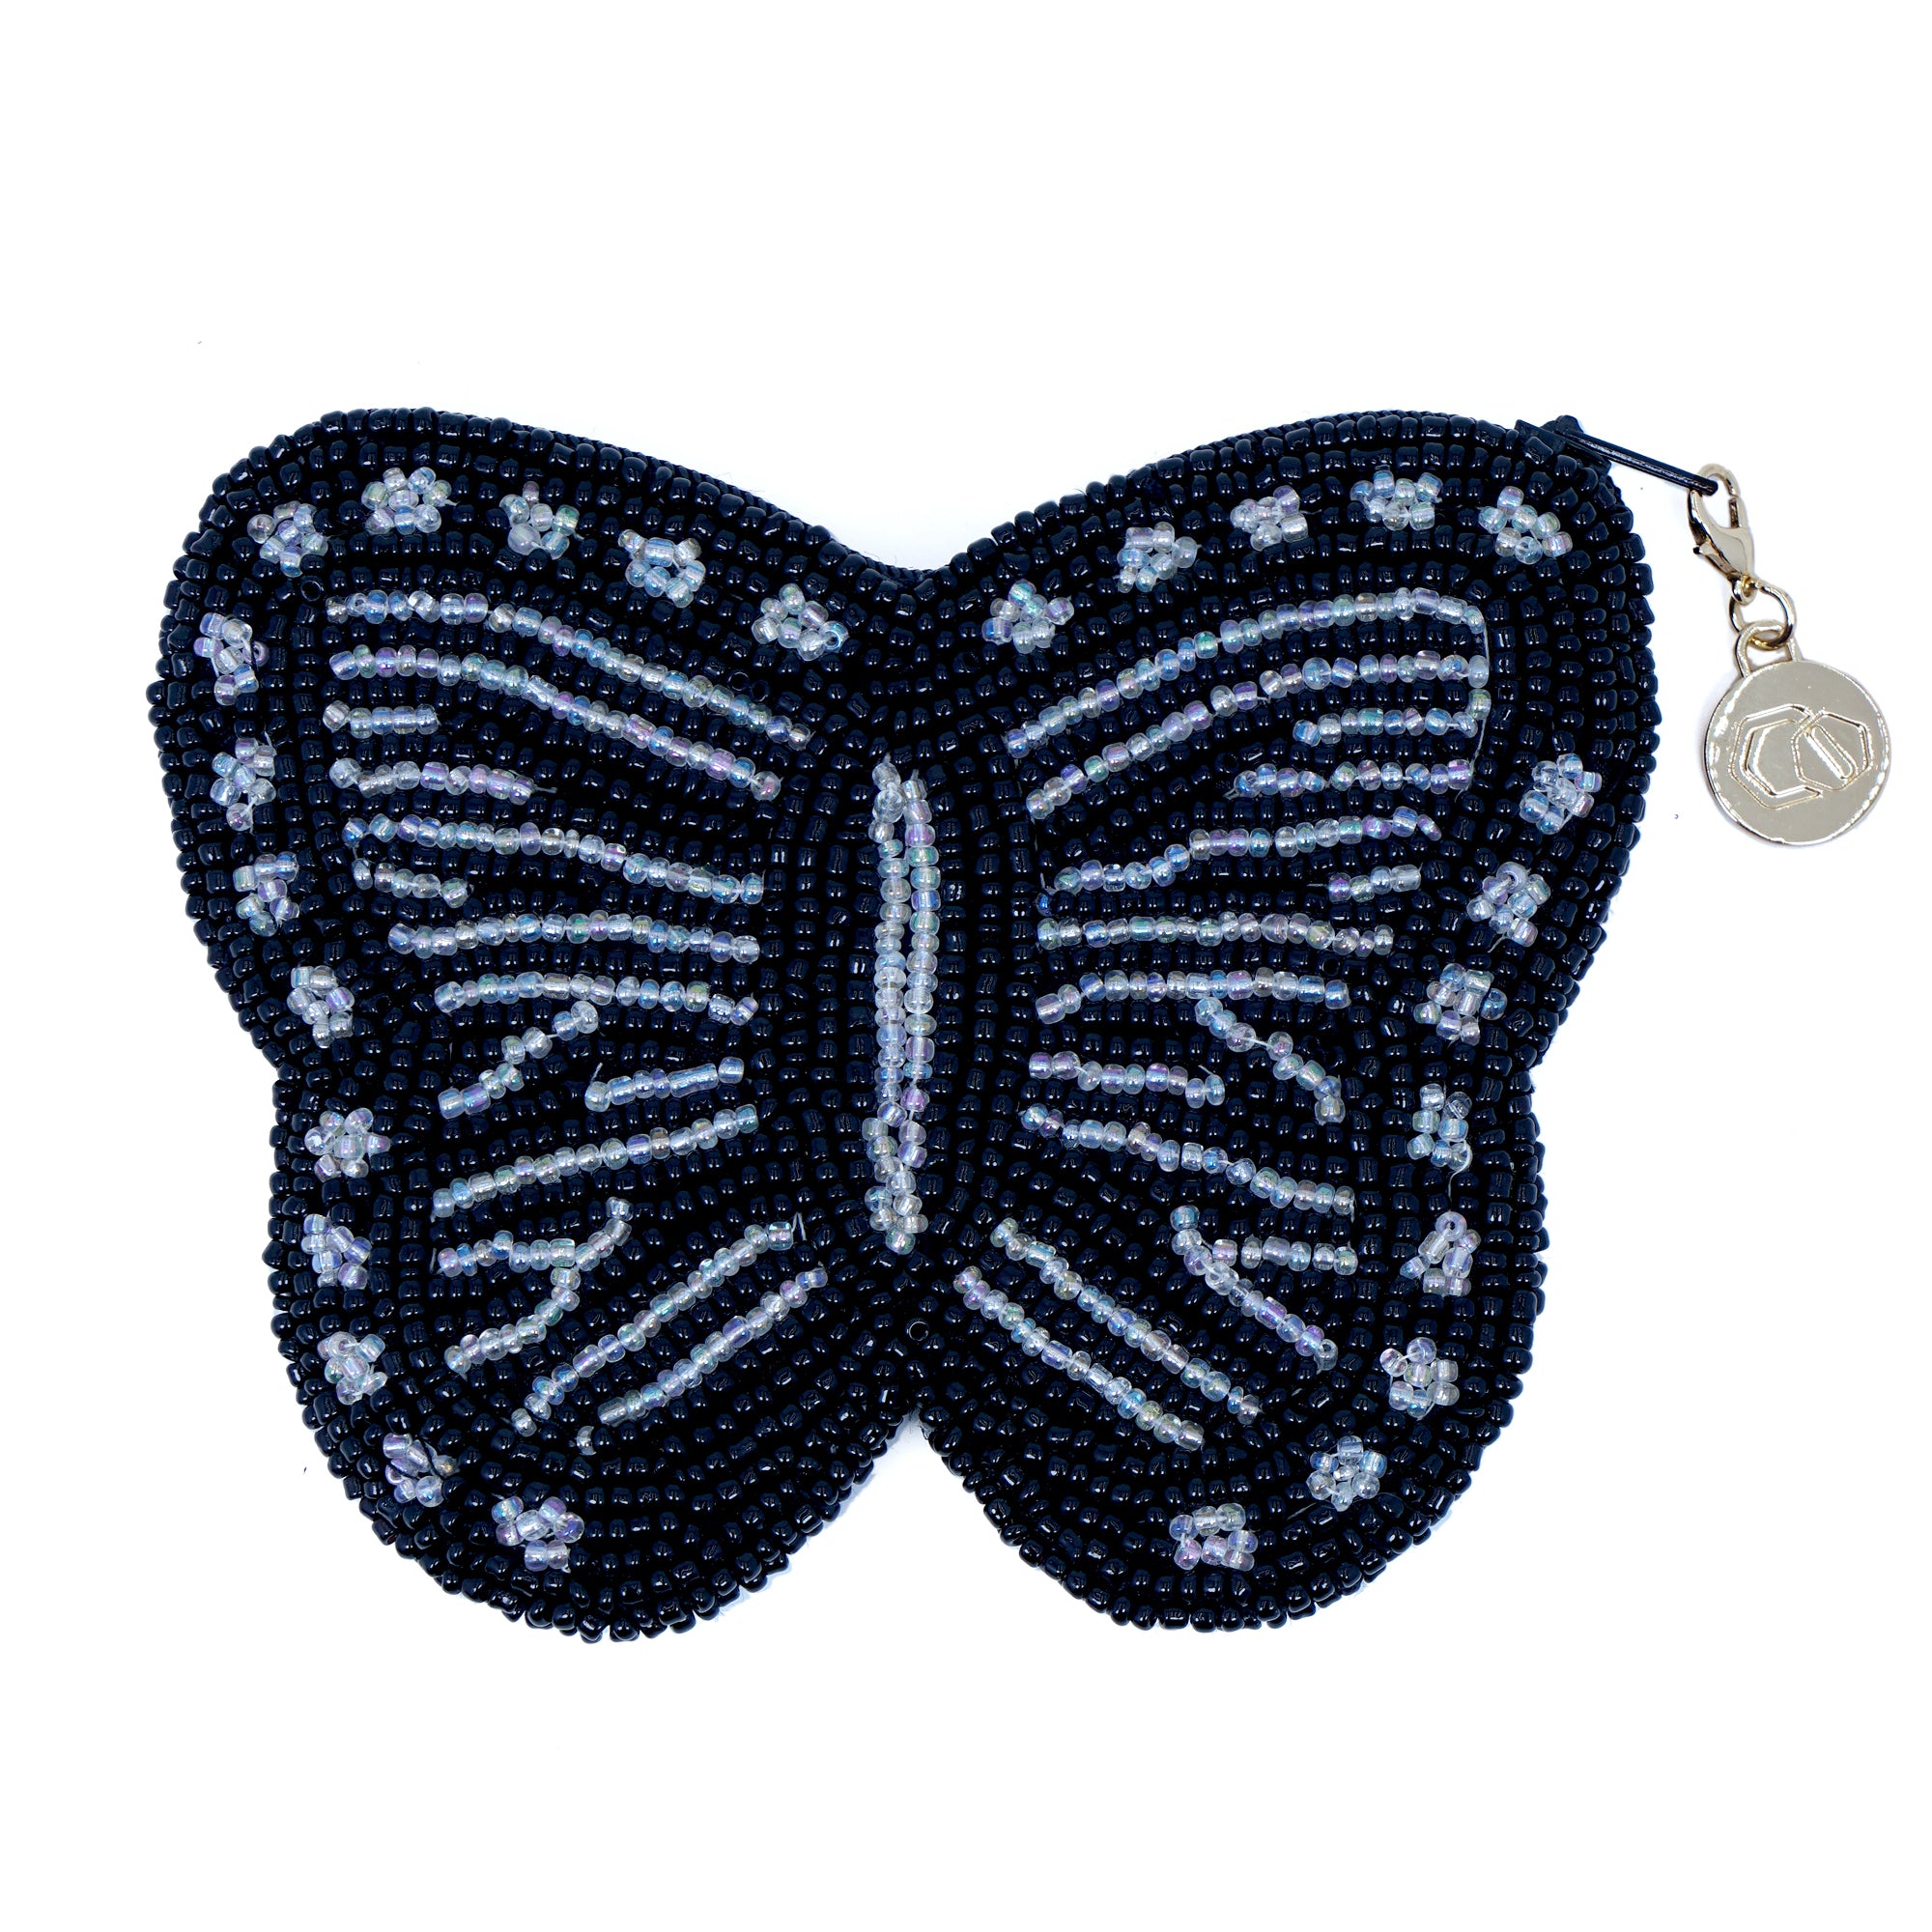 Beaded Coin Purse - Butterfly (BK)